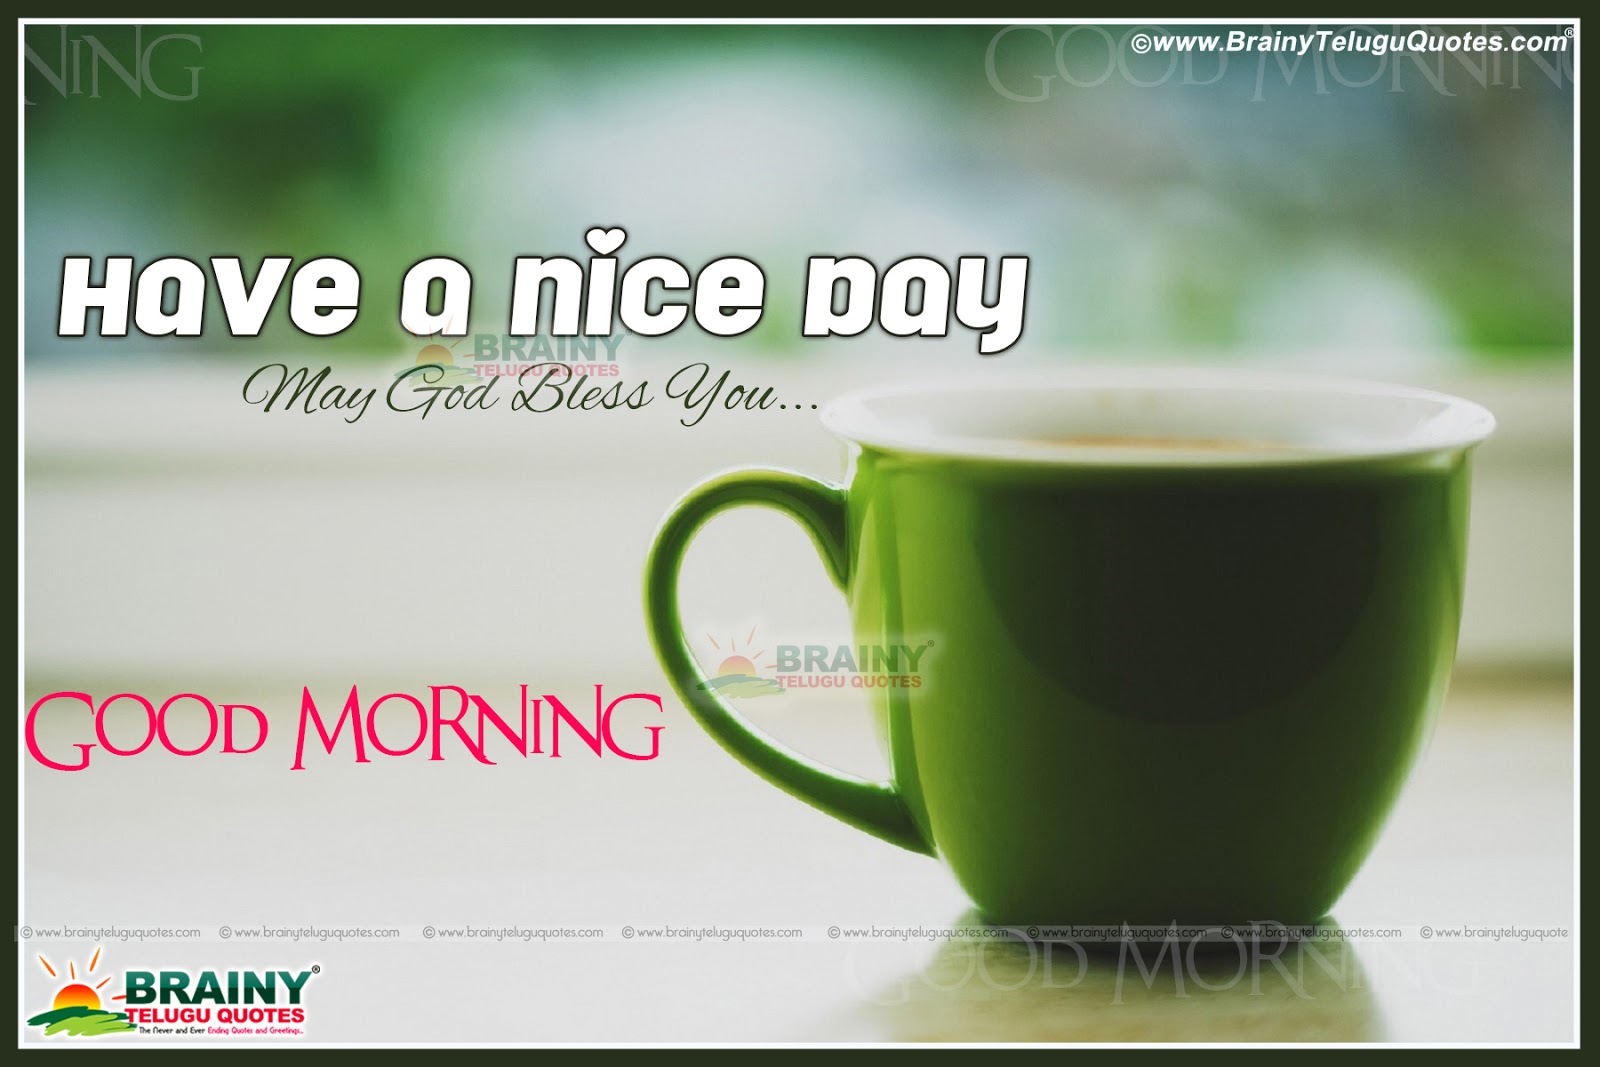 Good Morning English Comments And Best Wishes Brainyteluguquotes